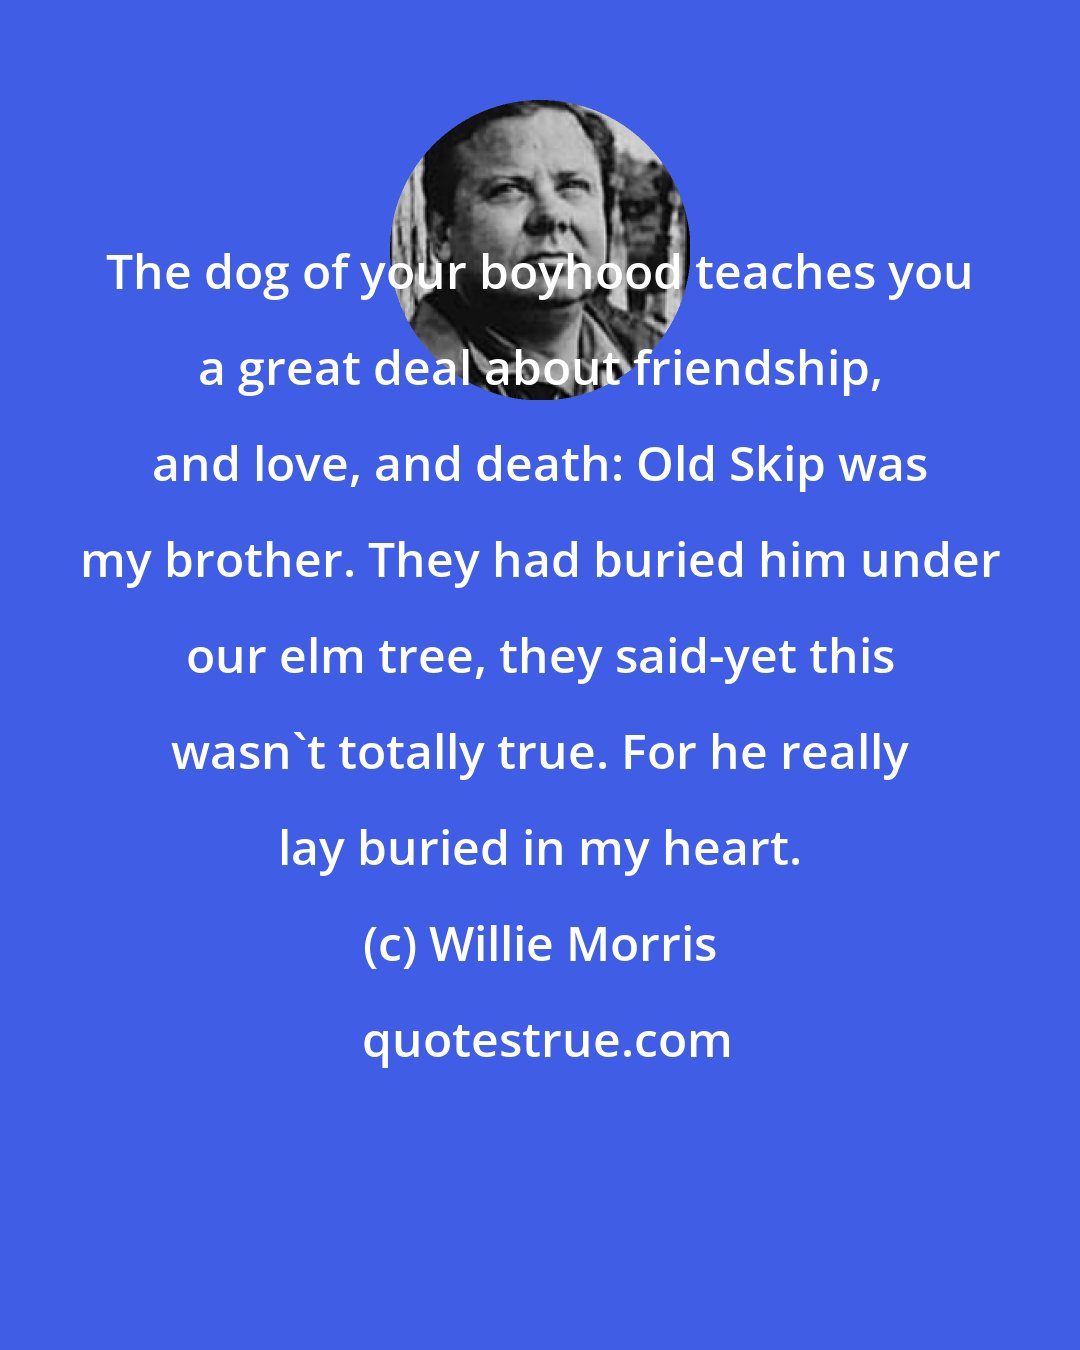 Willie Morris: The dog of your boyhood teaches you a great deal about friendship, and love, and death: Old Skip was my brother. They had buried him under our elm tree, they said-yet this wasn't totally true. For he really lay buried in my heart.